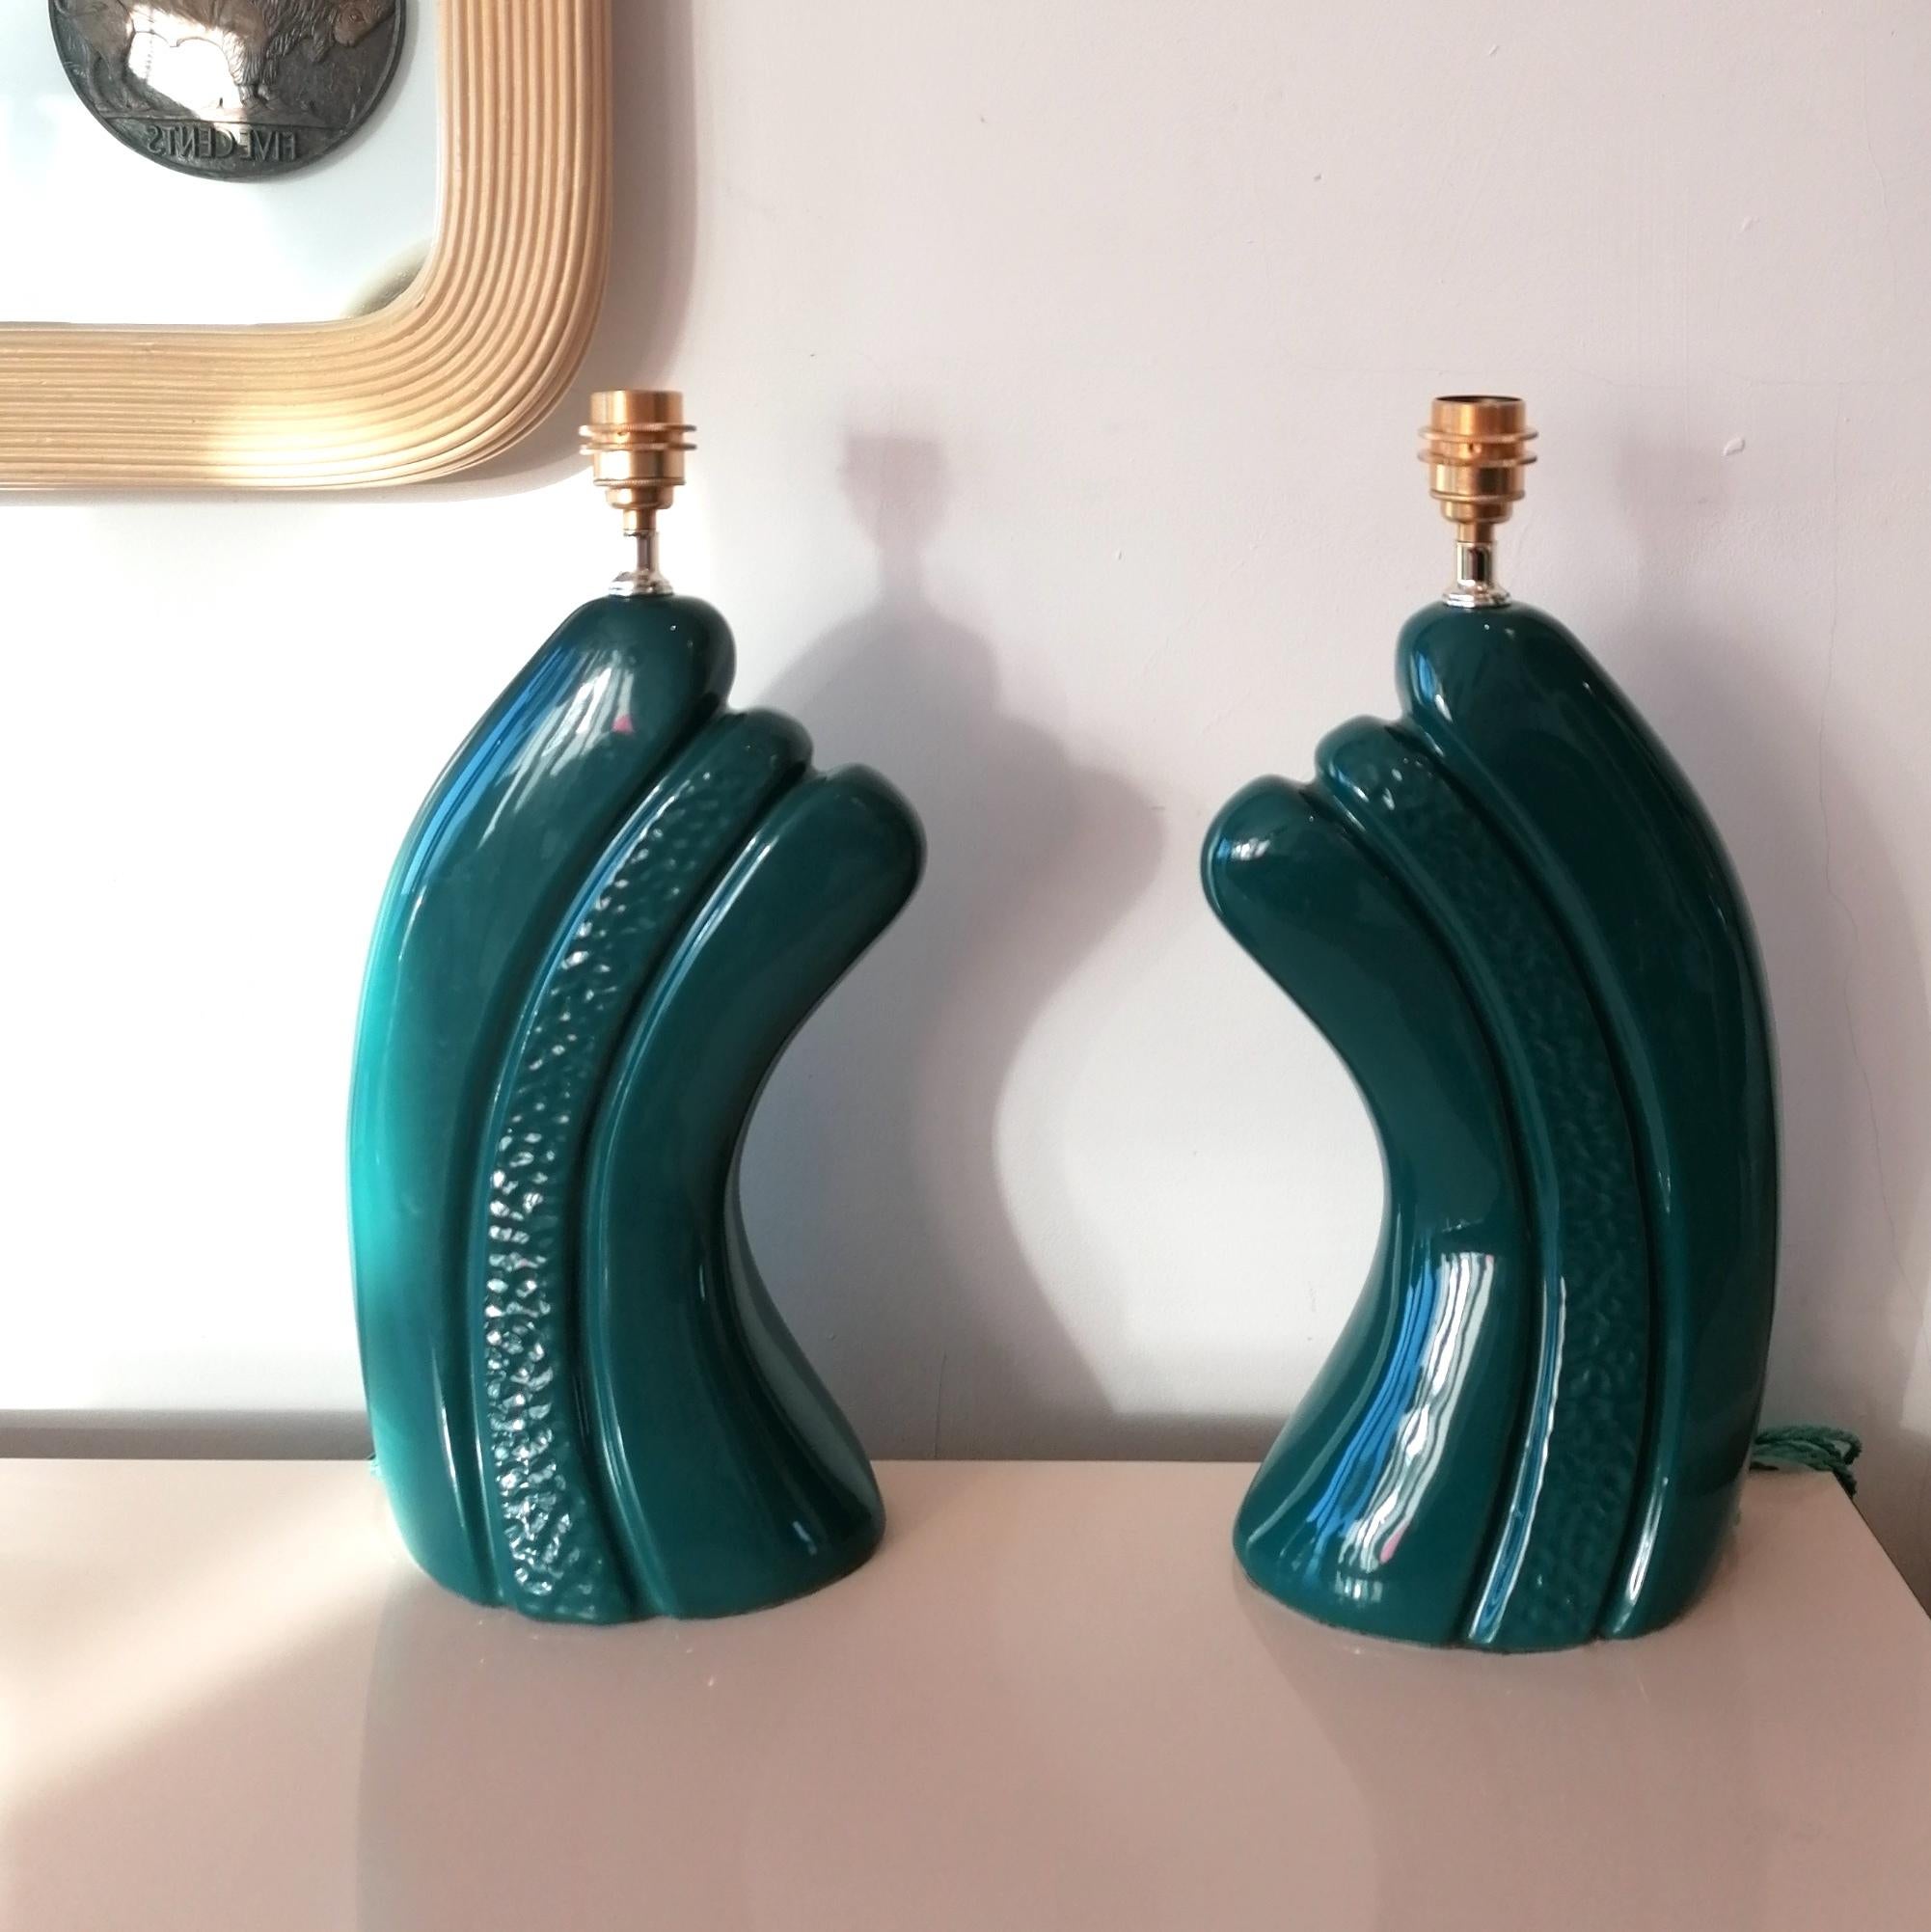 A pair of curvaceous dark, intense bluey green ceramic lamps, USA 1980s Art Deco revival. Newly rewired with braided cord.

Dimensions : height to top of bulb holder 49cm, width of body 23cm, depth 15cm, diameter of shade 41cm.